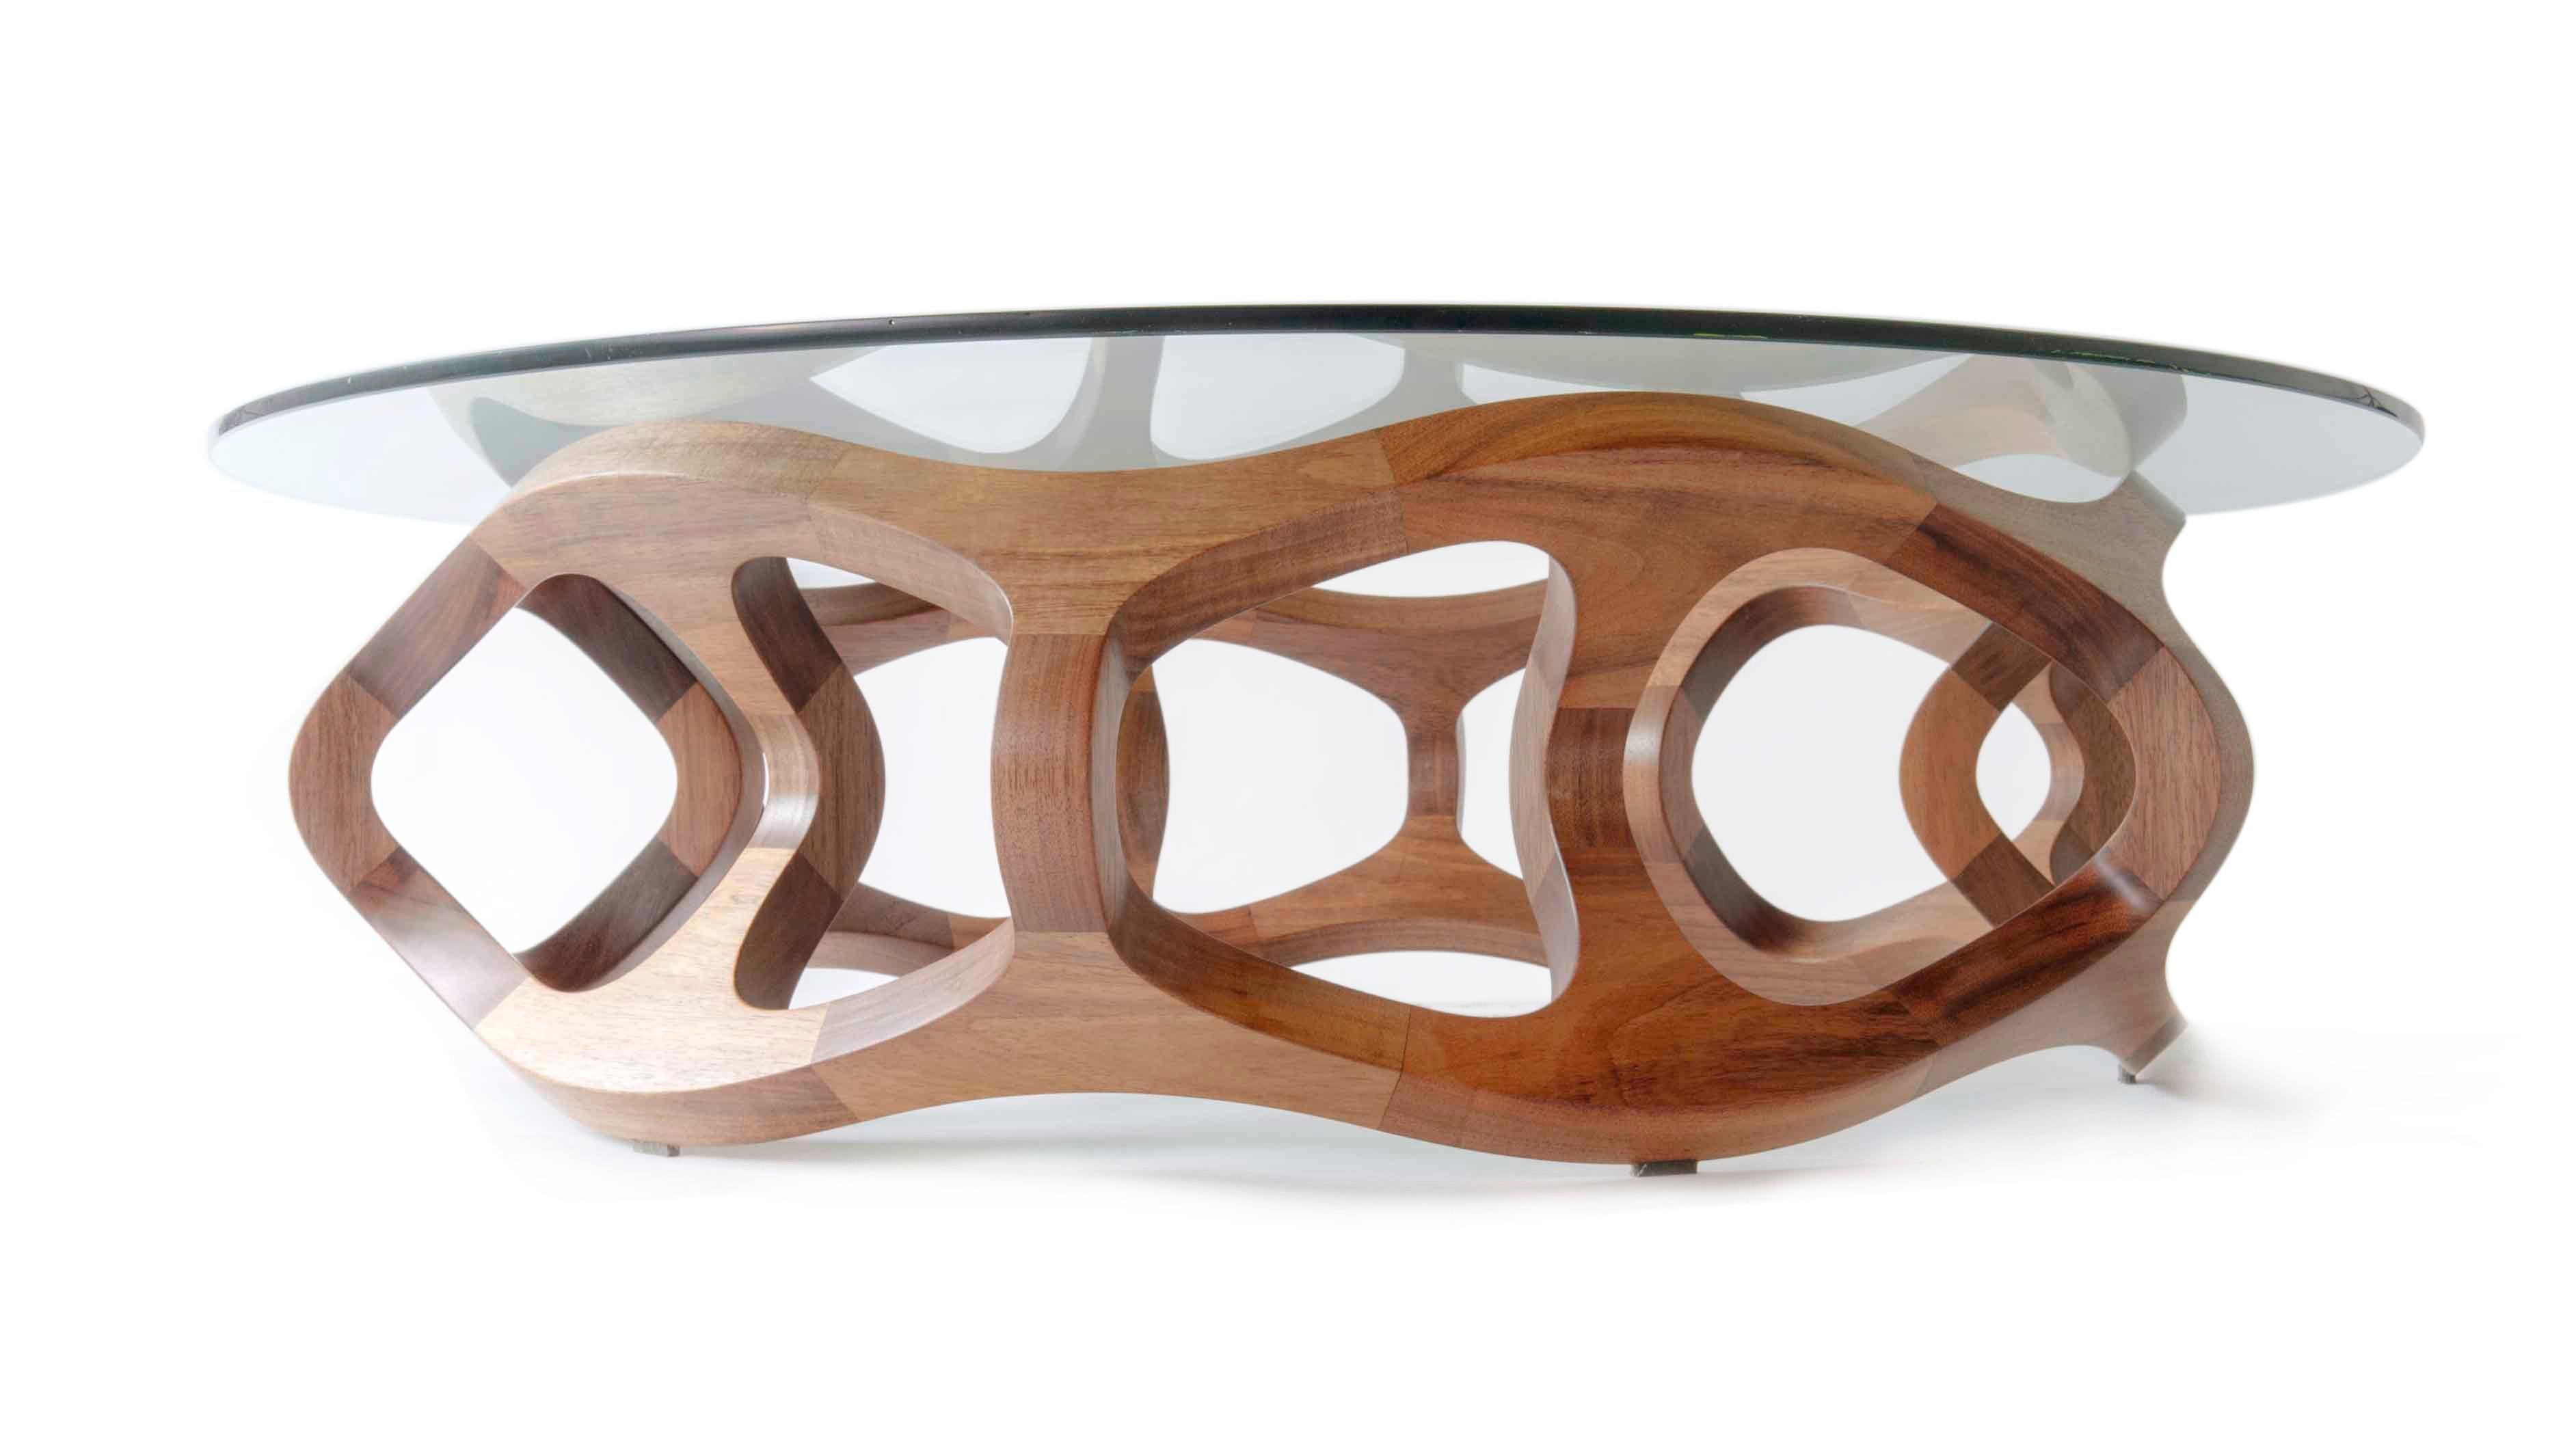 Toro G6, Geometric Sculptural Center Table Made of Solid Wood by Pedro Cerisola For Sale 4